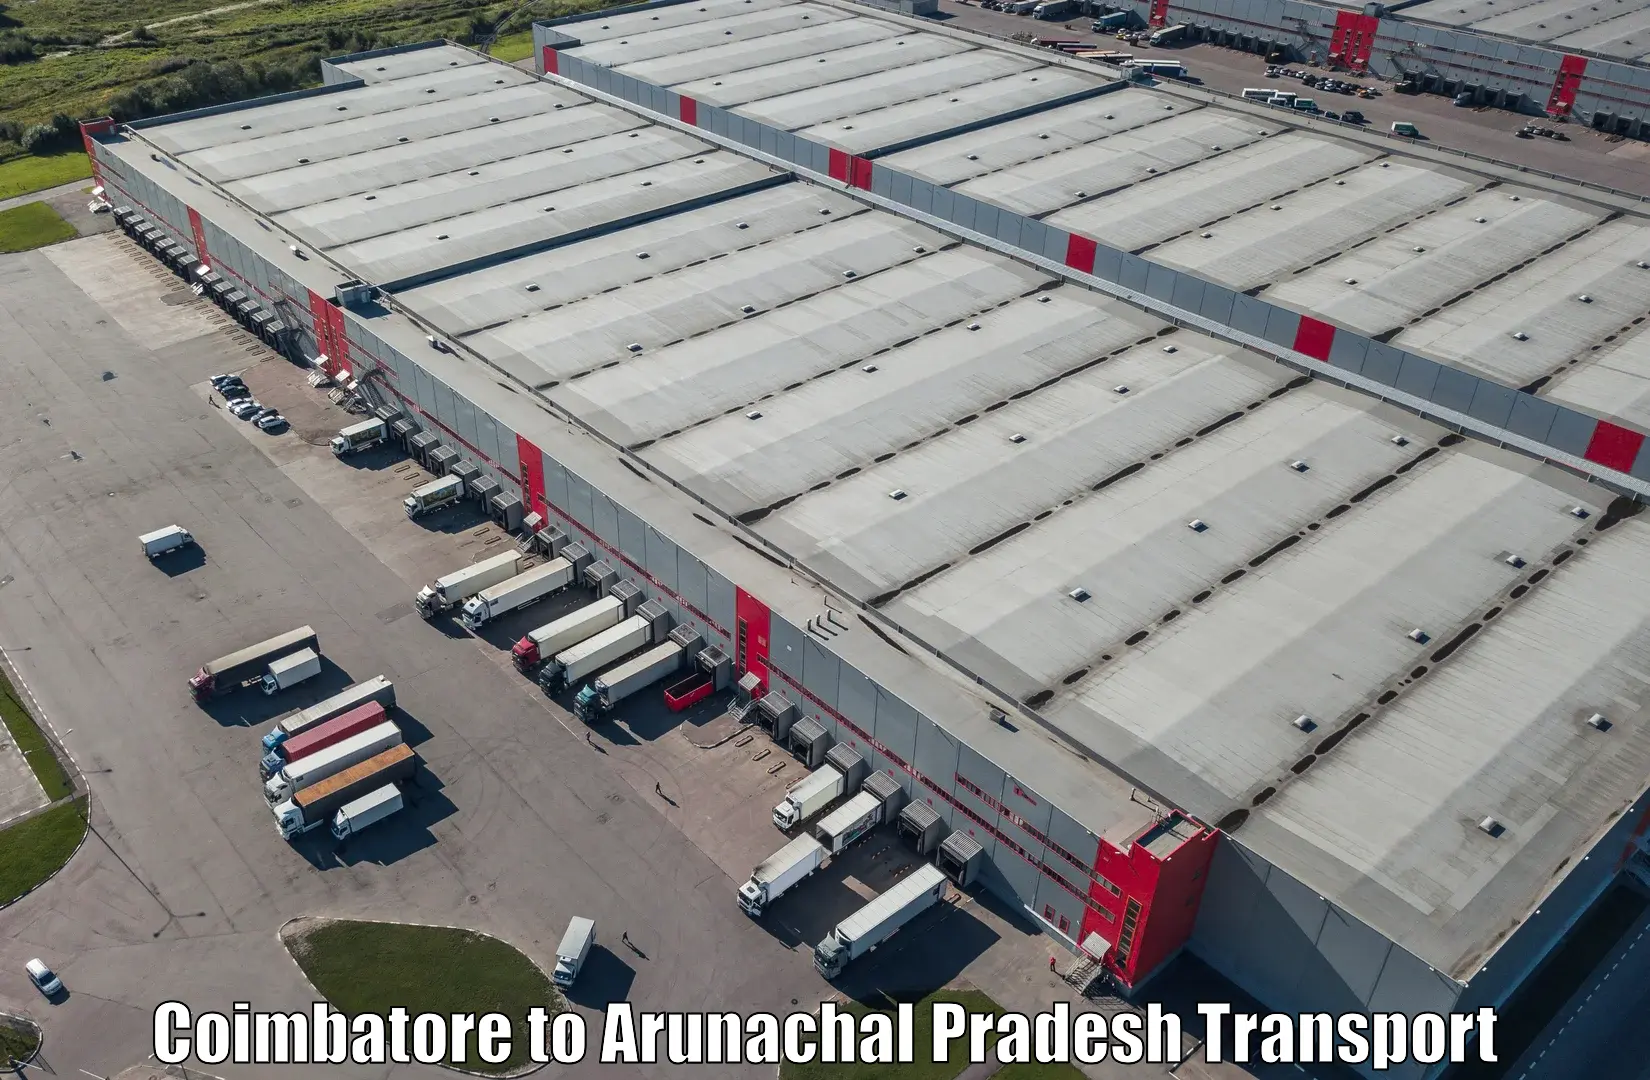 Truck transport companies in India in Coimbatore to Lower Dibang Valley